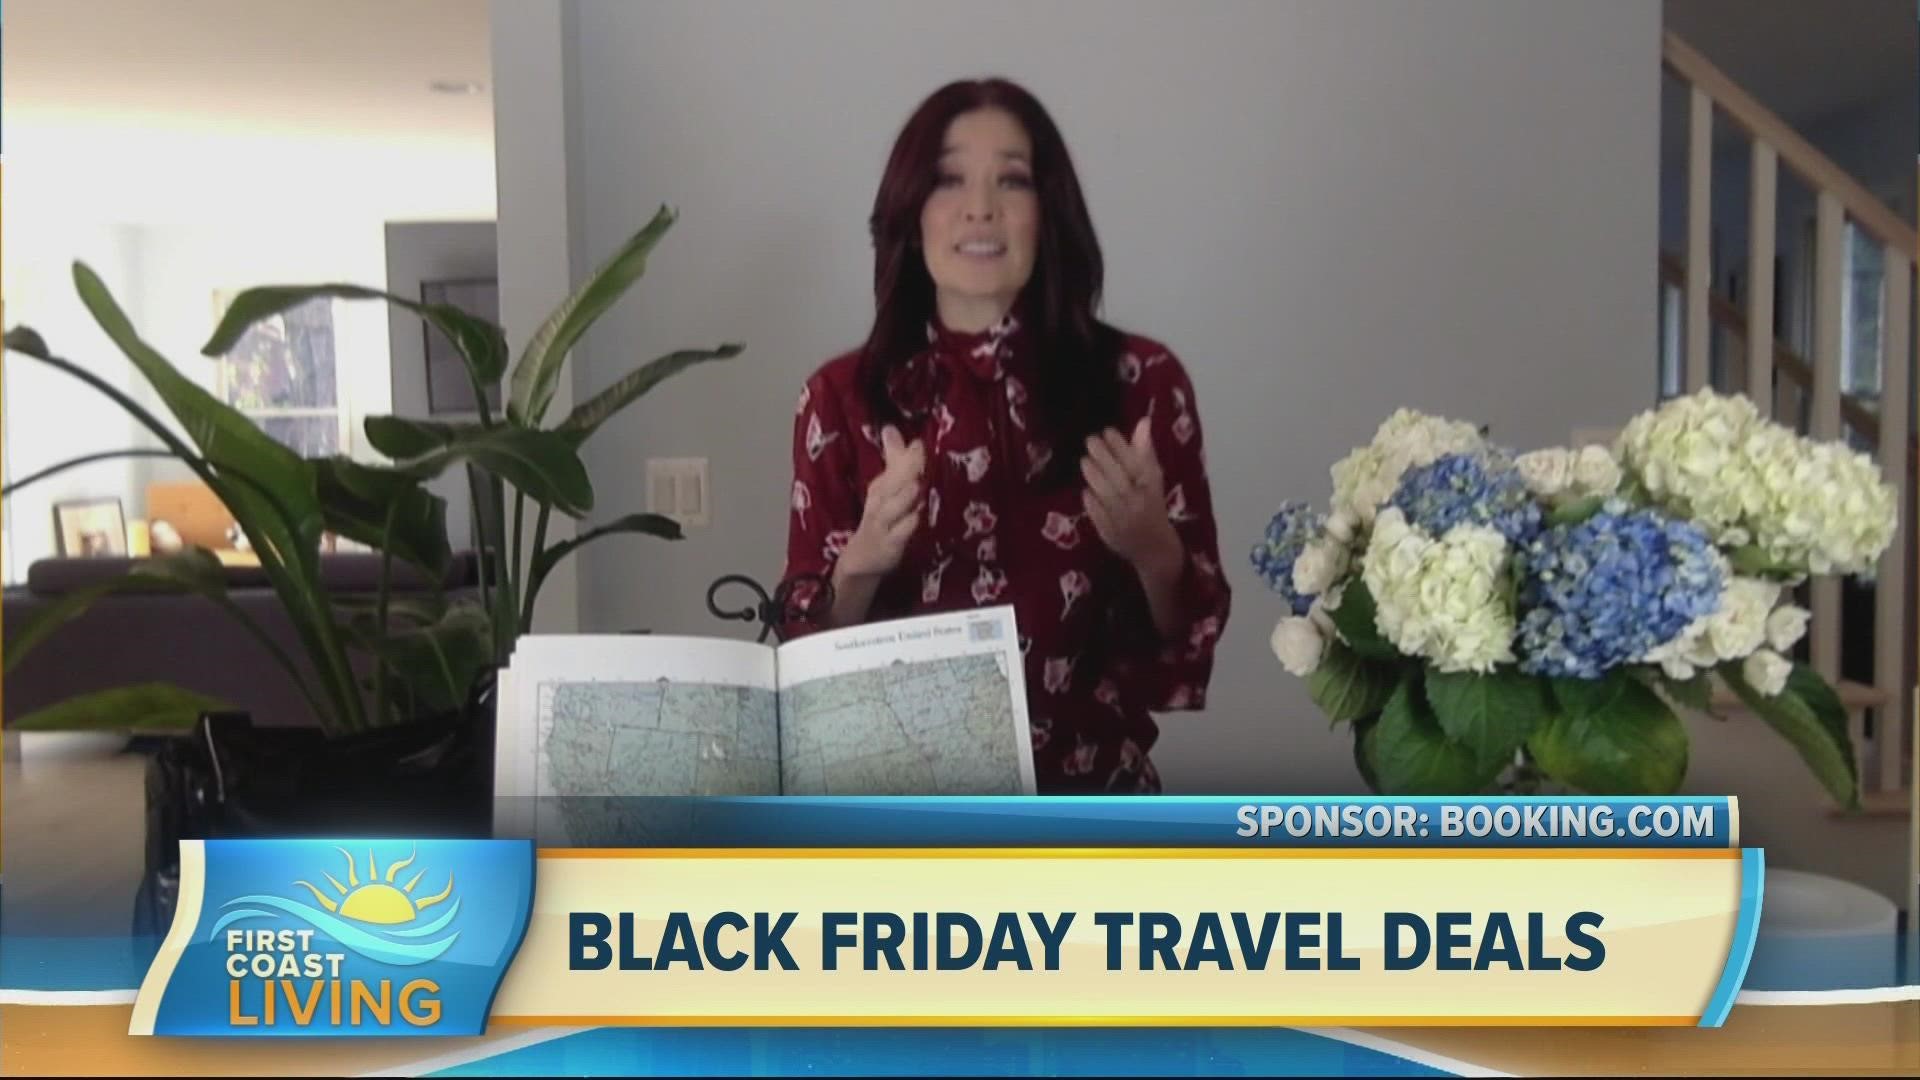 Lifestyle and travel expert Amy Goodman has the latest travel predictions for 2022 and the fun travel deals if you are ready right now for the ultimate vacation.